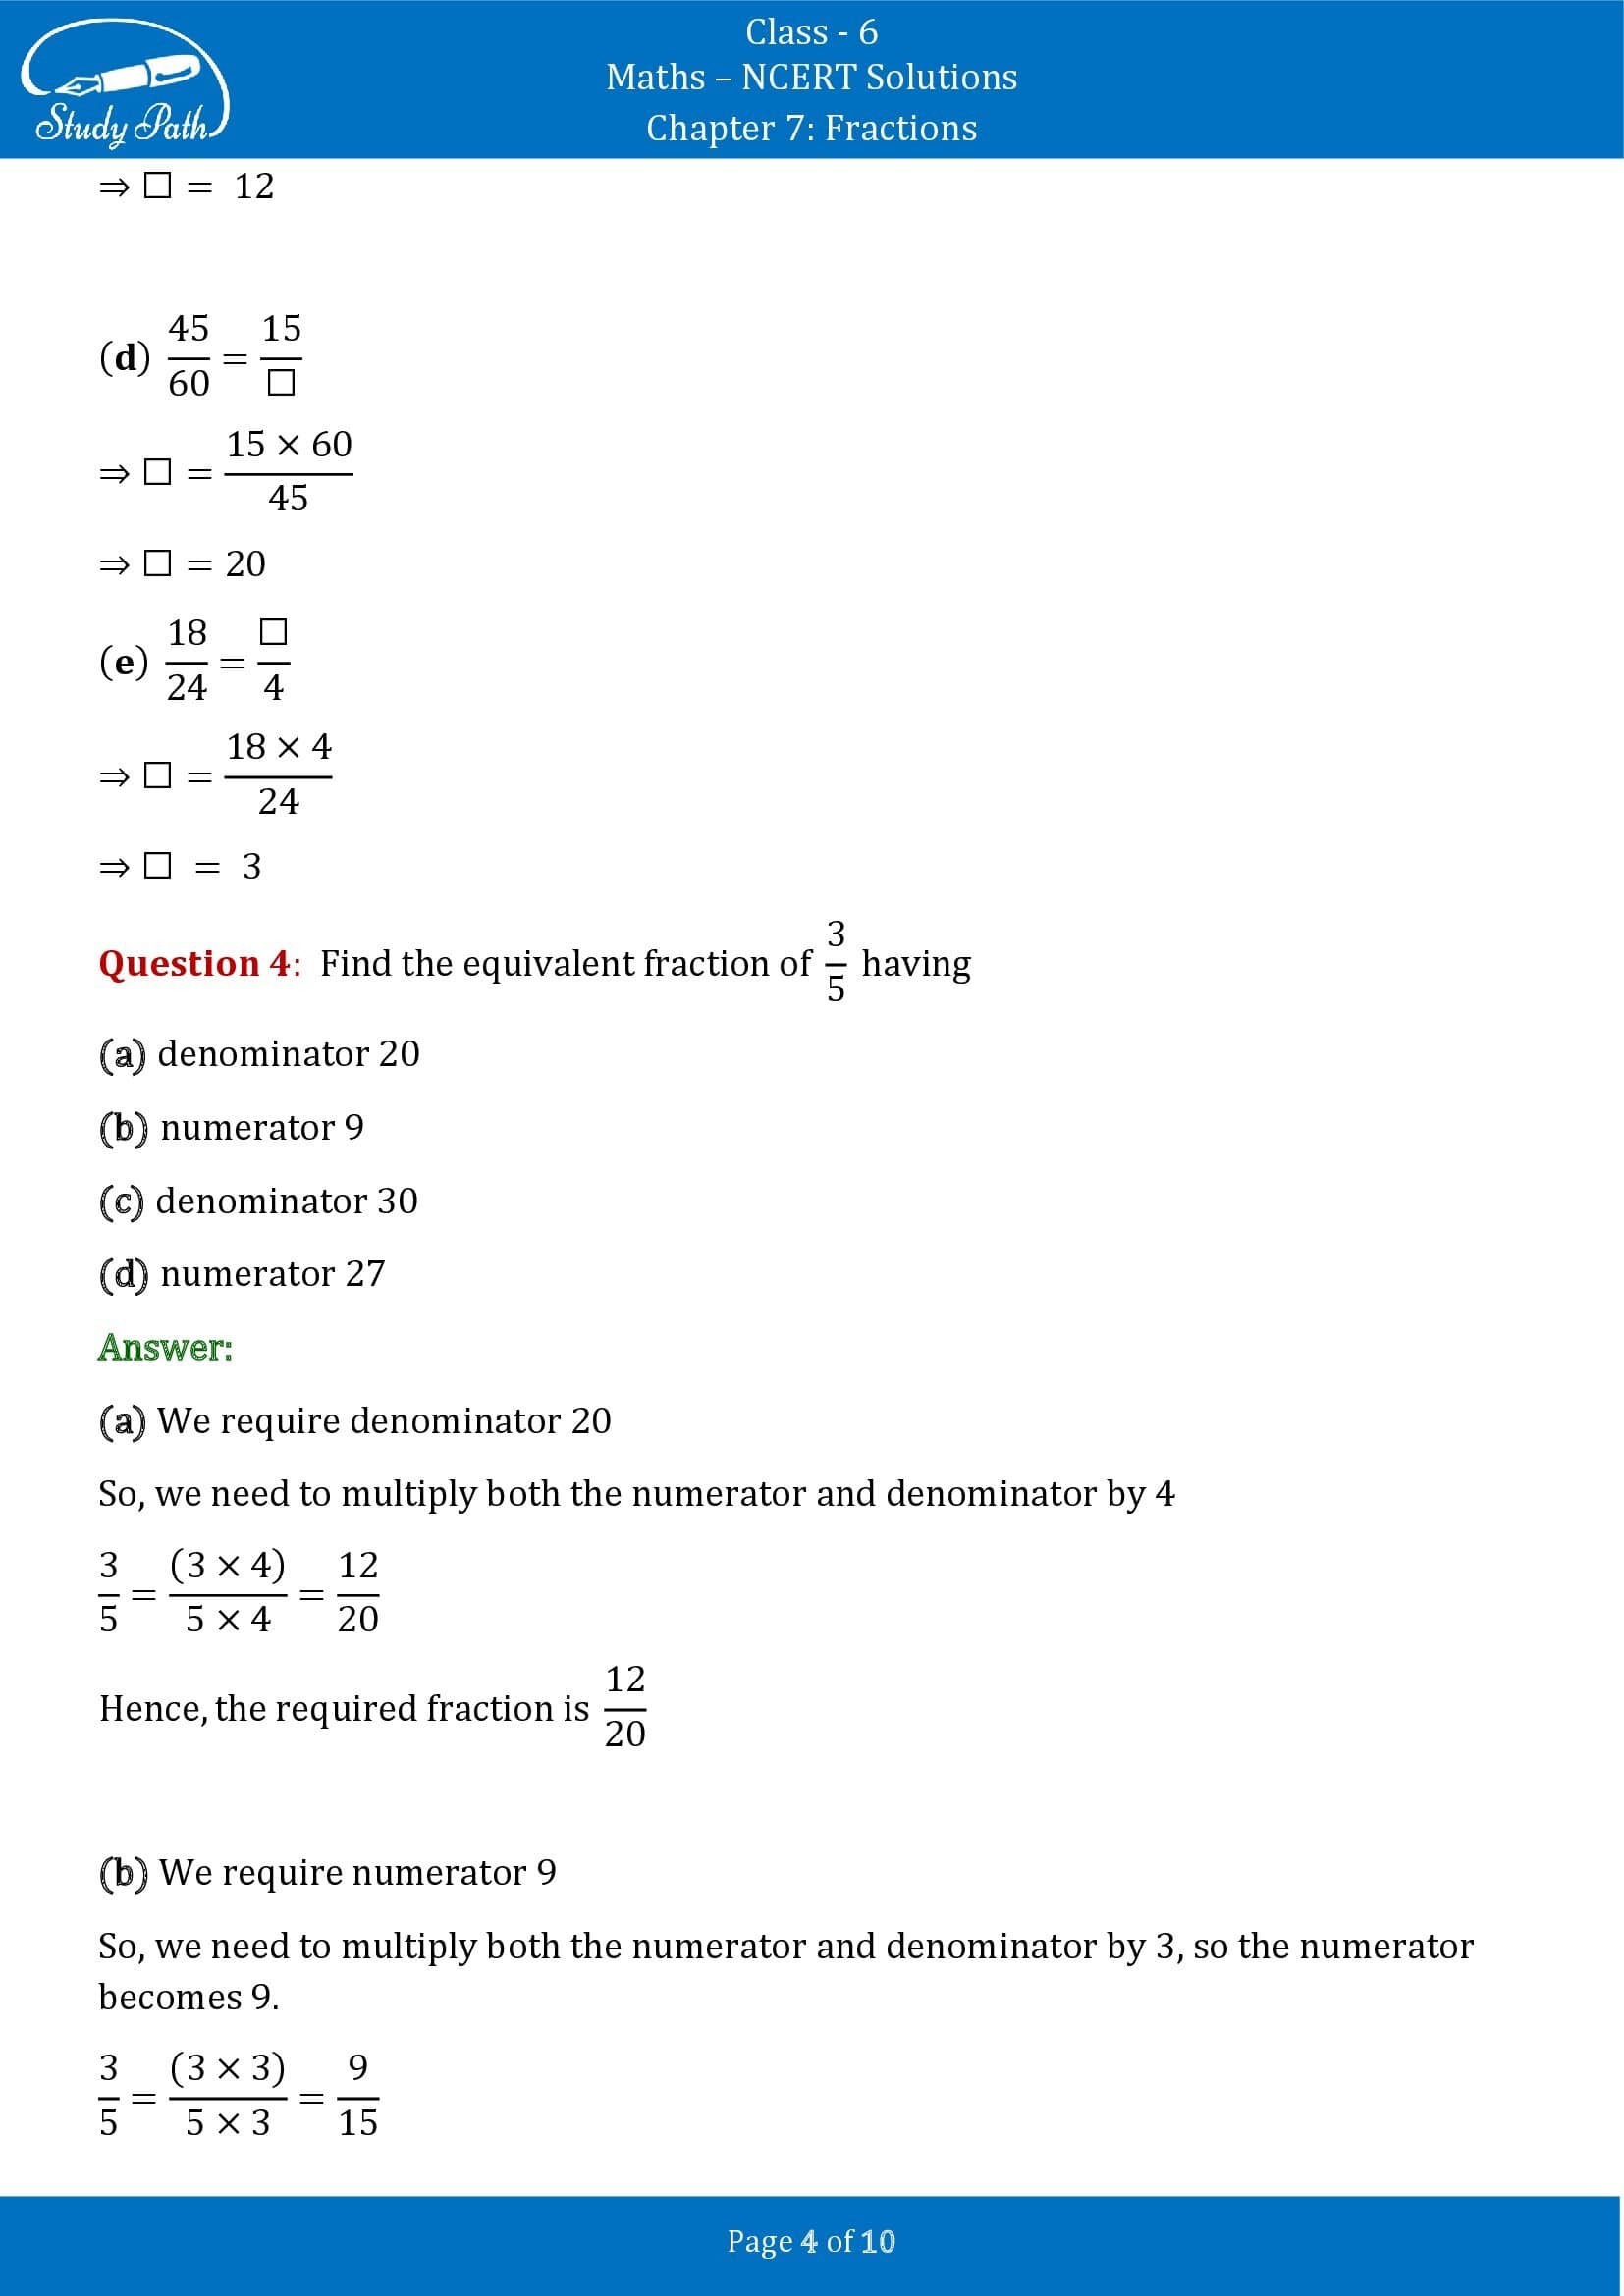 NCERT Solutions for Class 6 Maths Chapter 7 Fractions Exercise 7.3 00004